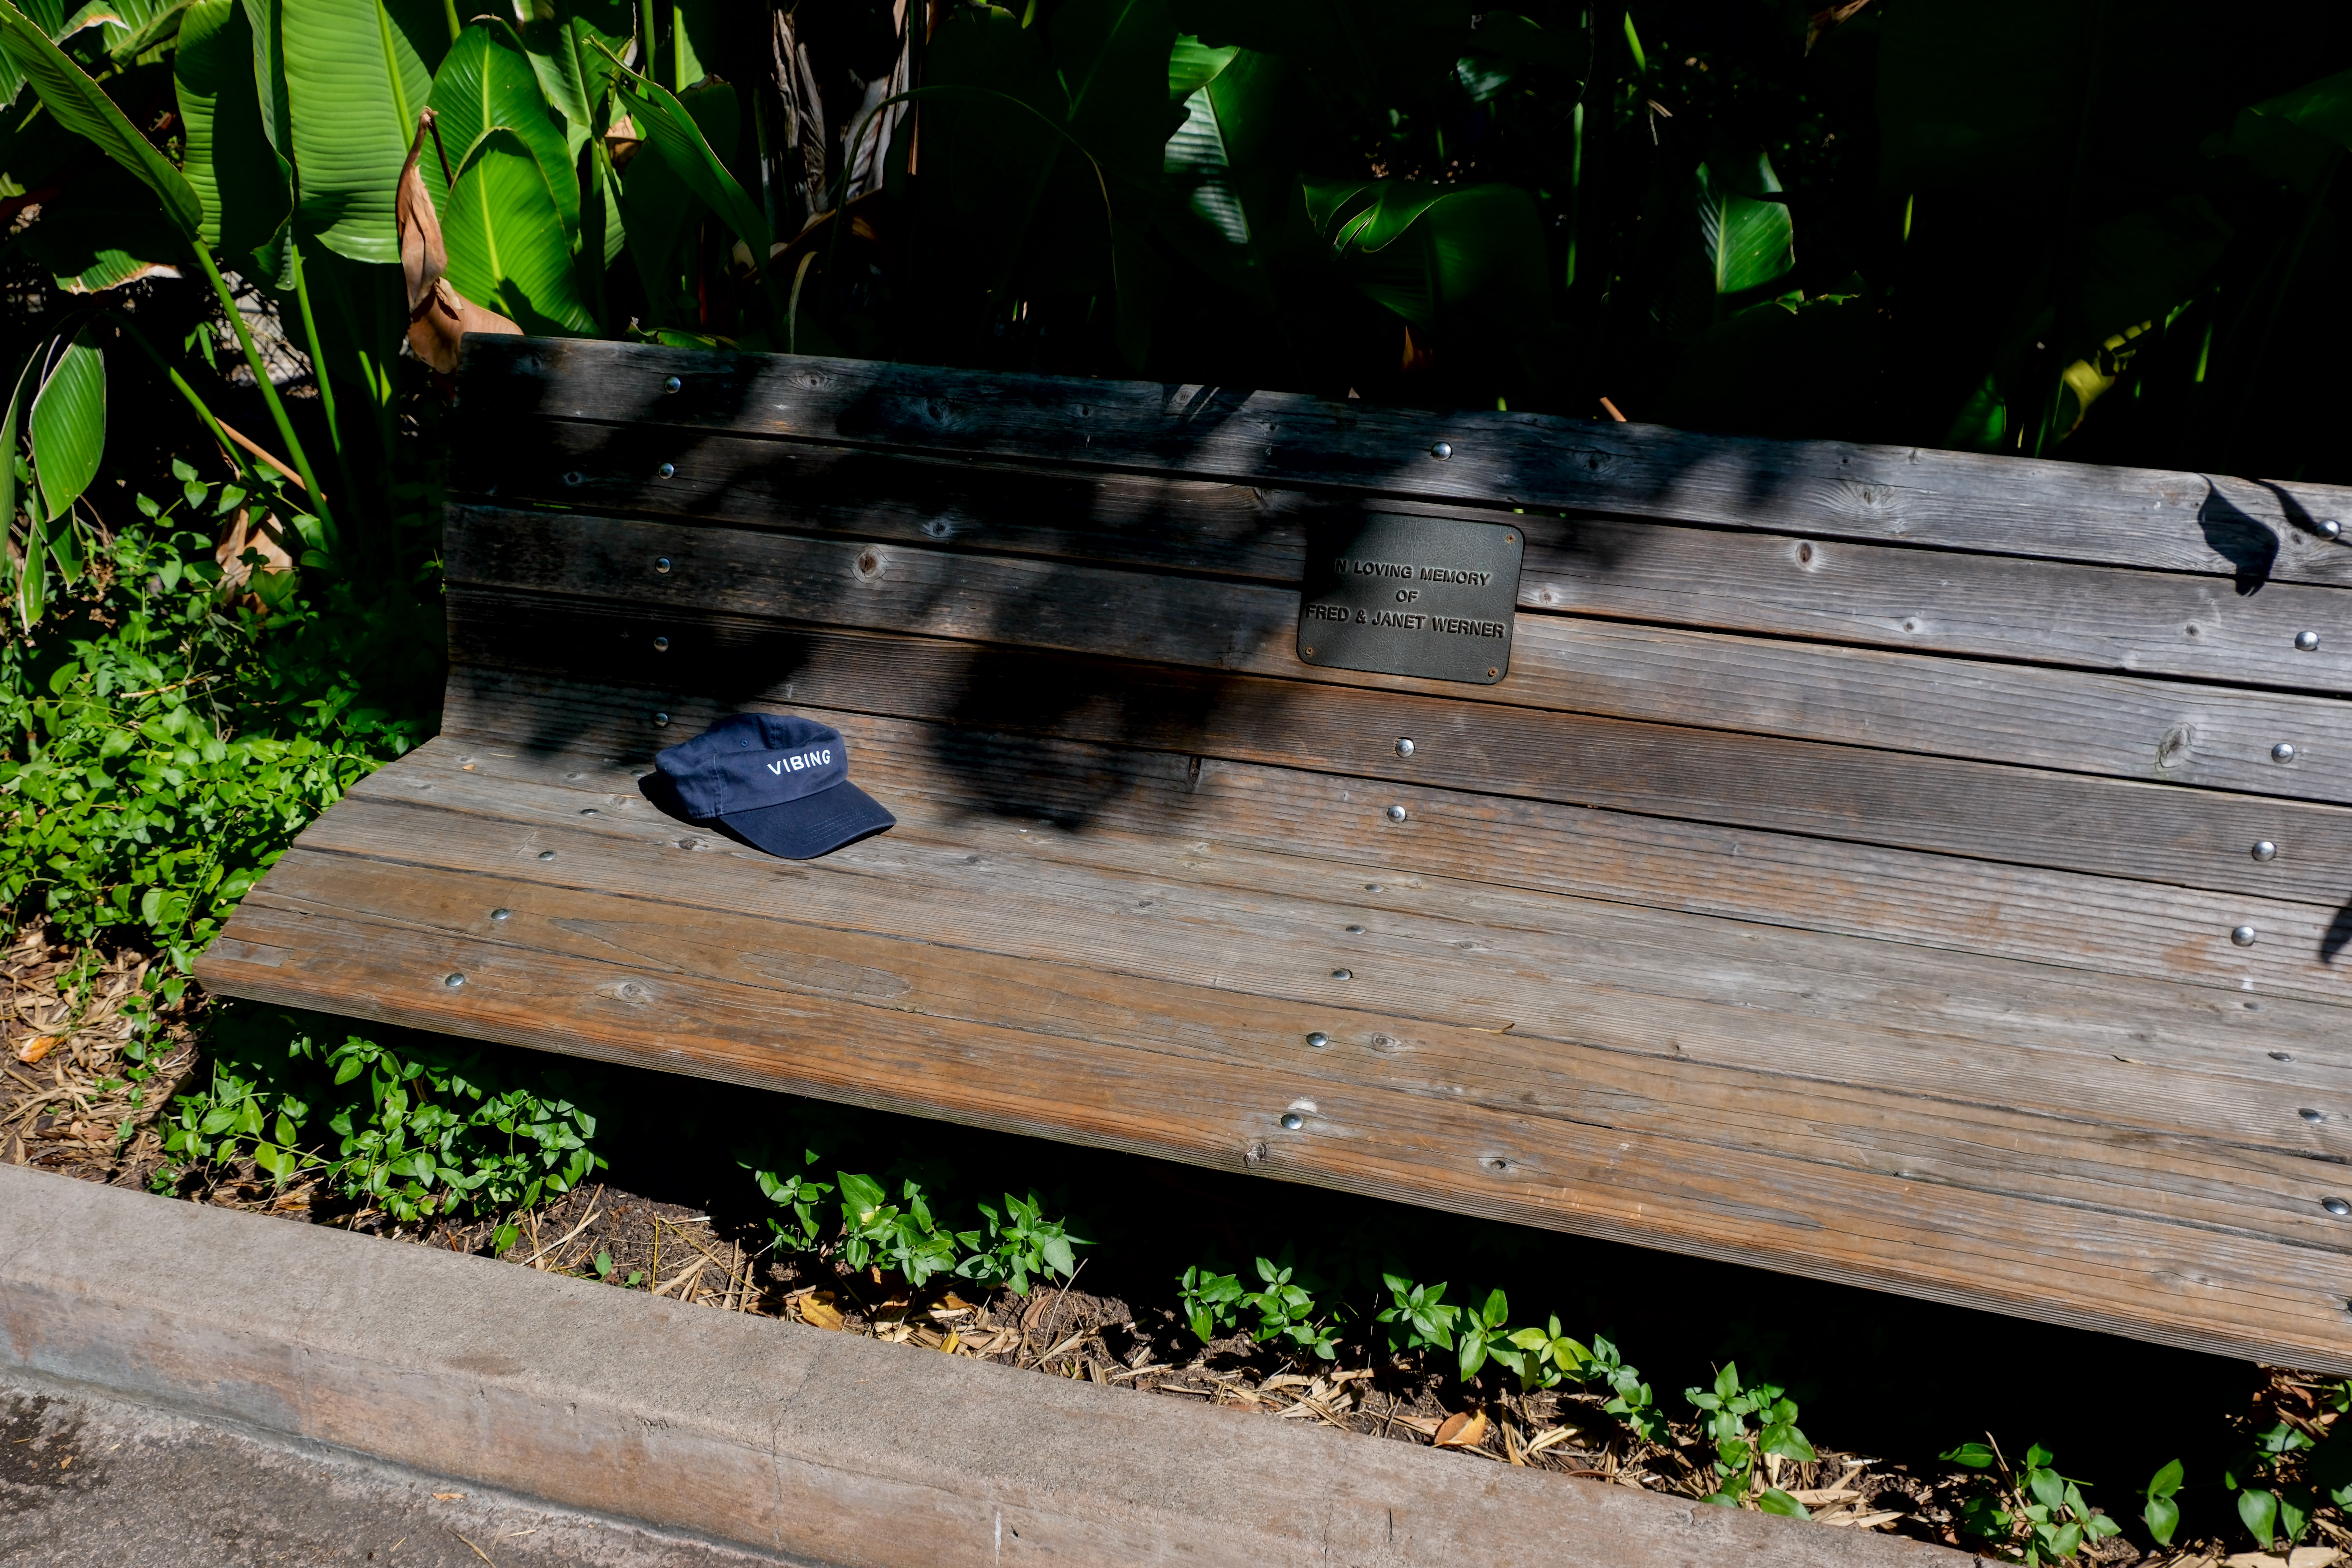  A black hat with "Vibing" written on the front, abandoned on a bench. The bench is surrounded by lush green plants. 